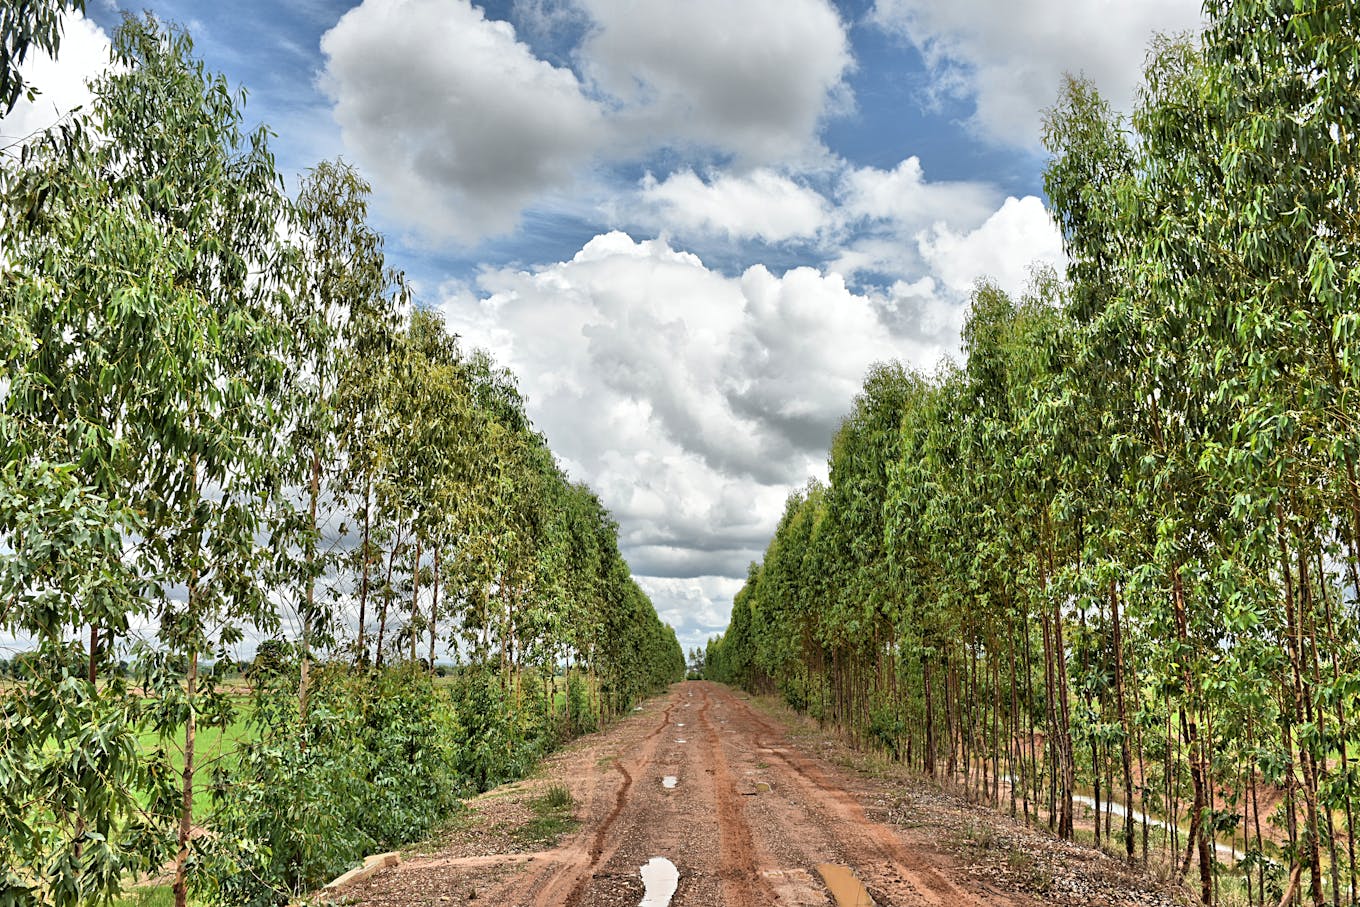 Trees line a dirt track in Thailand.